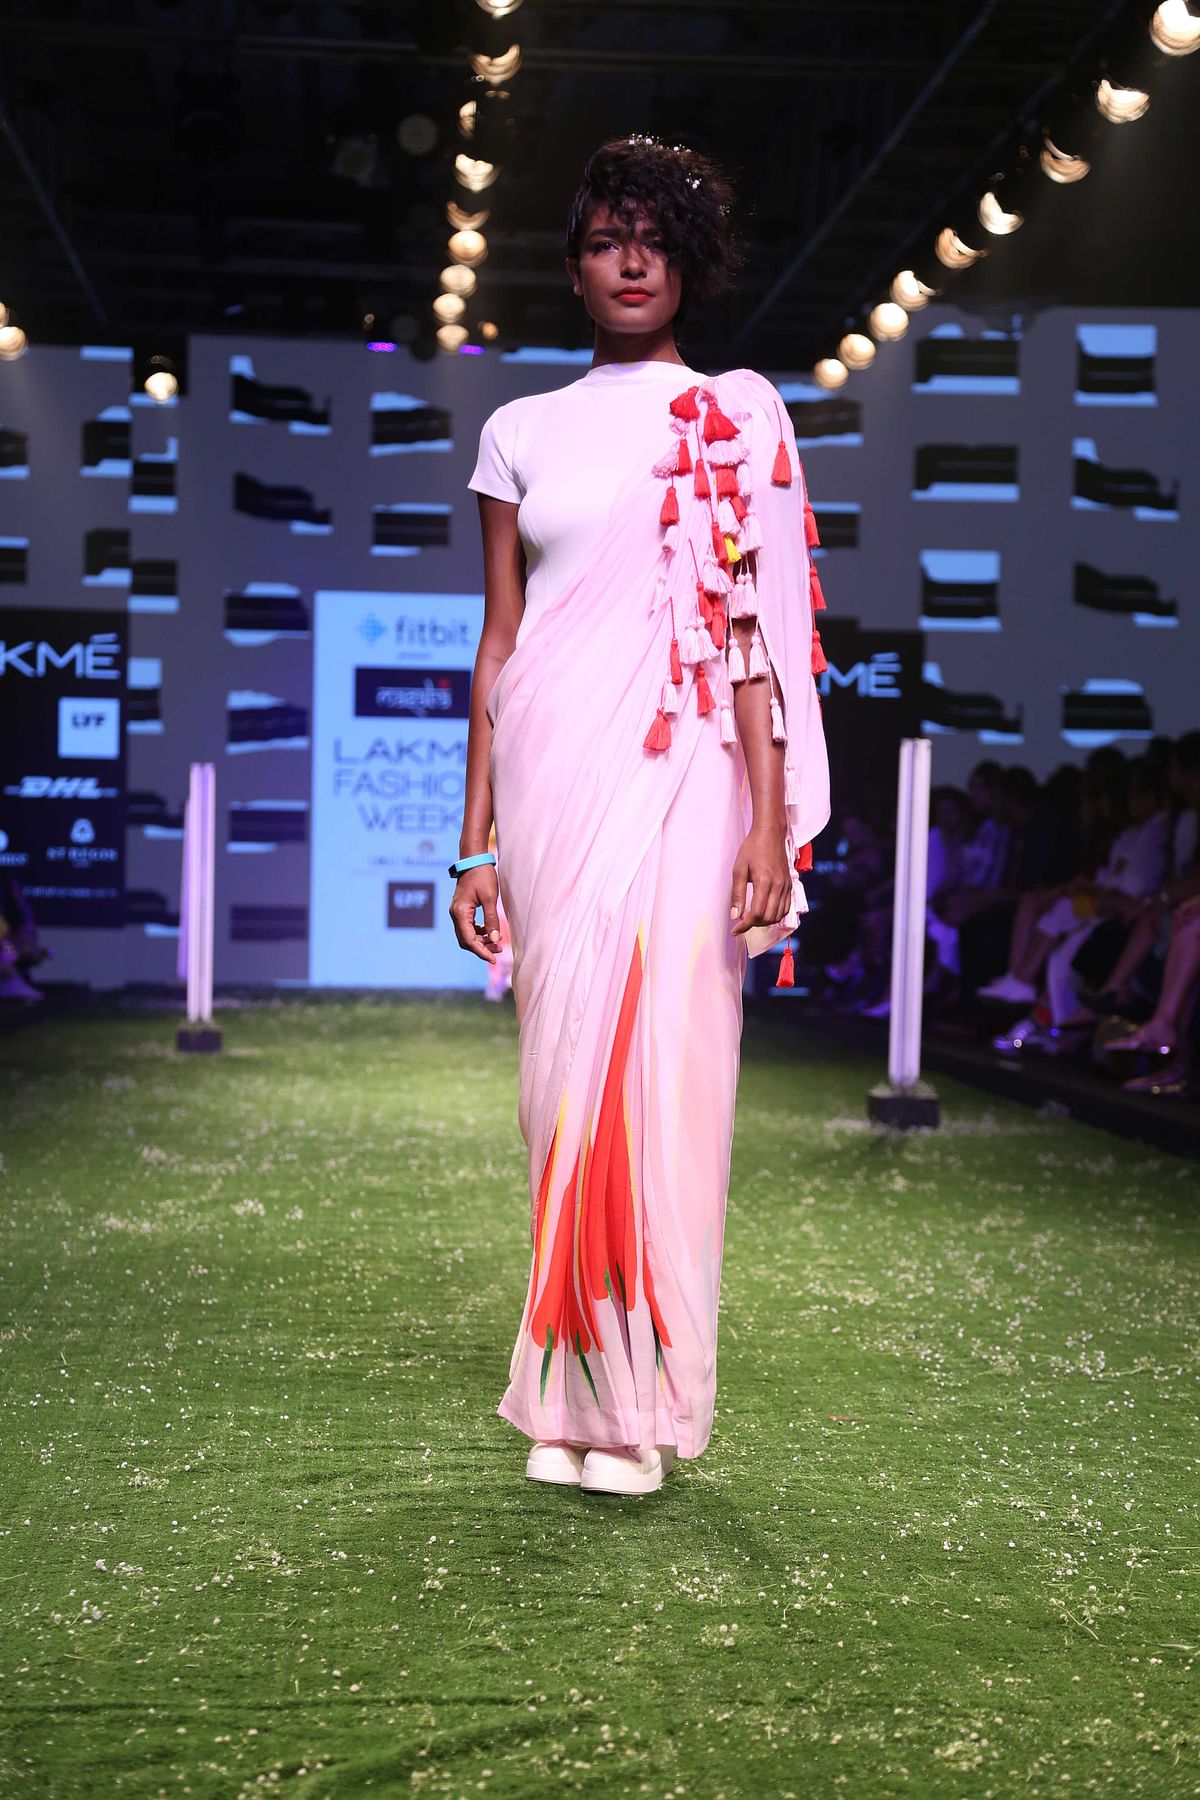 Day 4 at Lakme Fashion Week was an eclectic mix of earthy tones, gleam, glitter and so much more. What’s your pick?